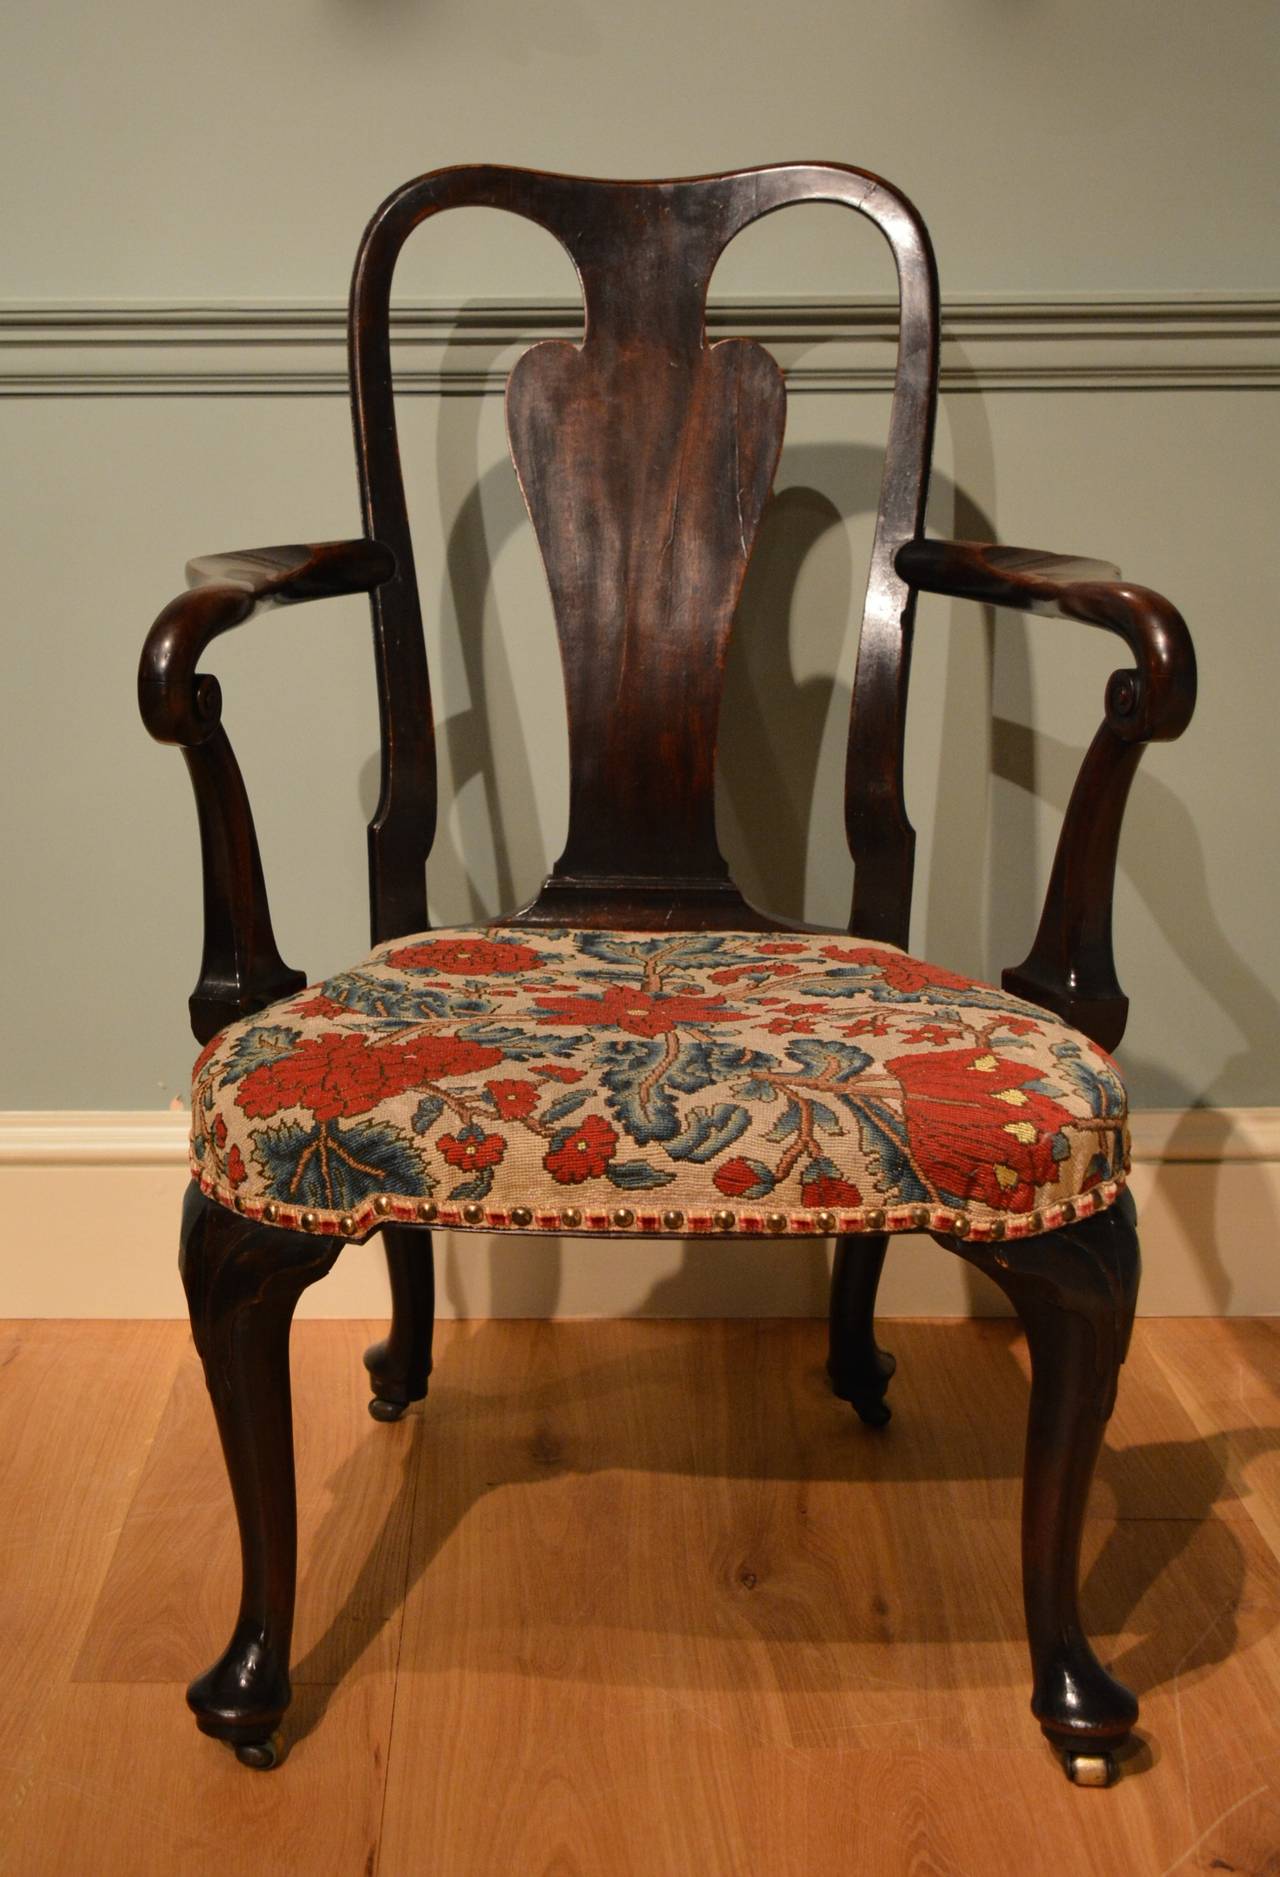 A George II mahogany armchair of exceptional drawing, the solid vase splat above the 18th Century floral needlework covered seat, cabriole legs to front and rear, with lapets carved to the front knees with pad feet and casters.
English Circa 1740